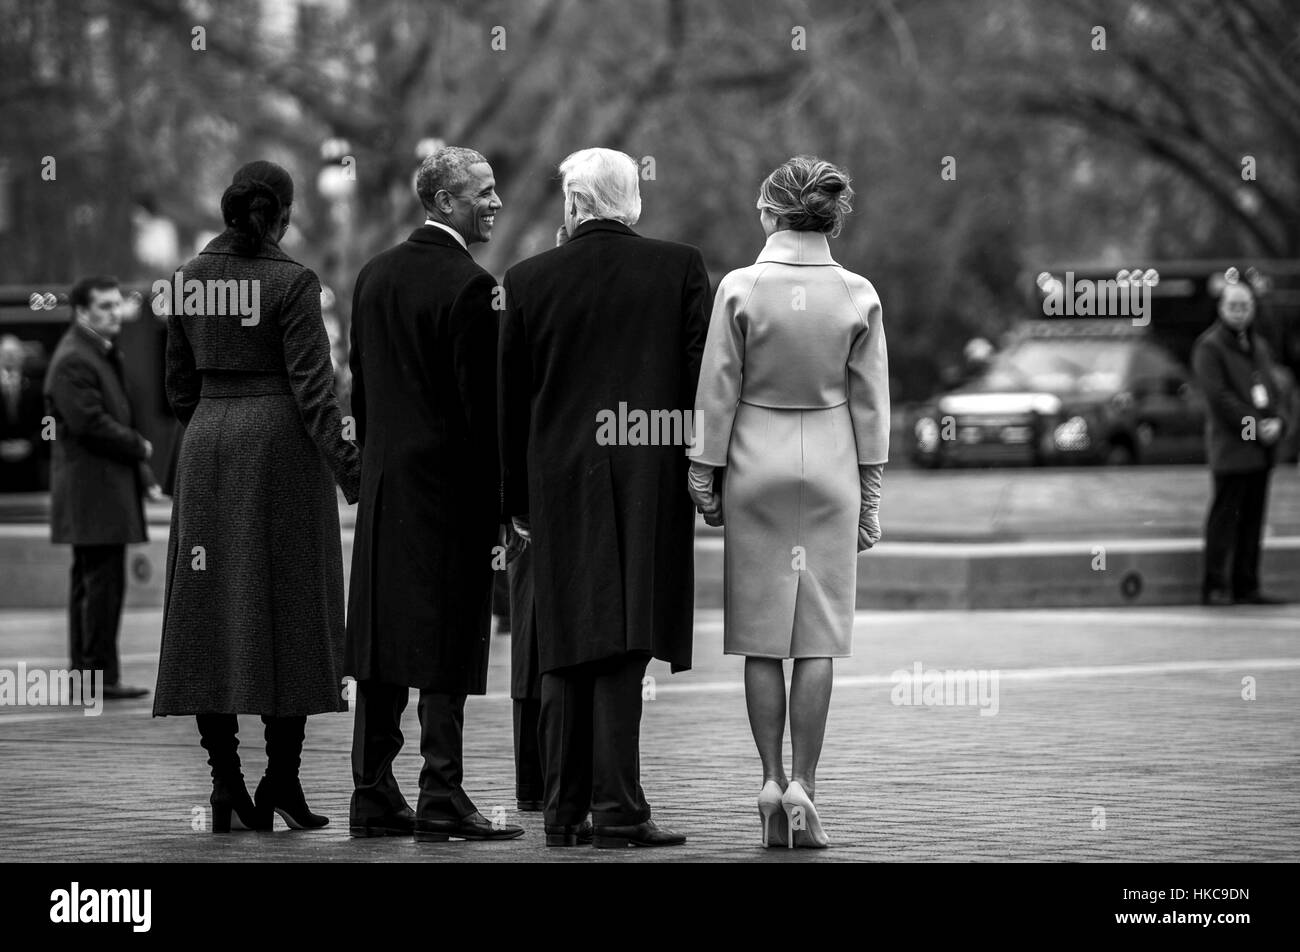 U.S. President Donald Trump, First Lady Melania Trump, former President Barack Obama, and former First Lady Michelle Obama walk toward the Executive One aircraft during the departure ceremony at the 58th Presidential Inauguration January 20, 2017 in Washington, DC. Stock Photo